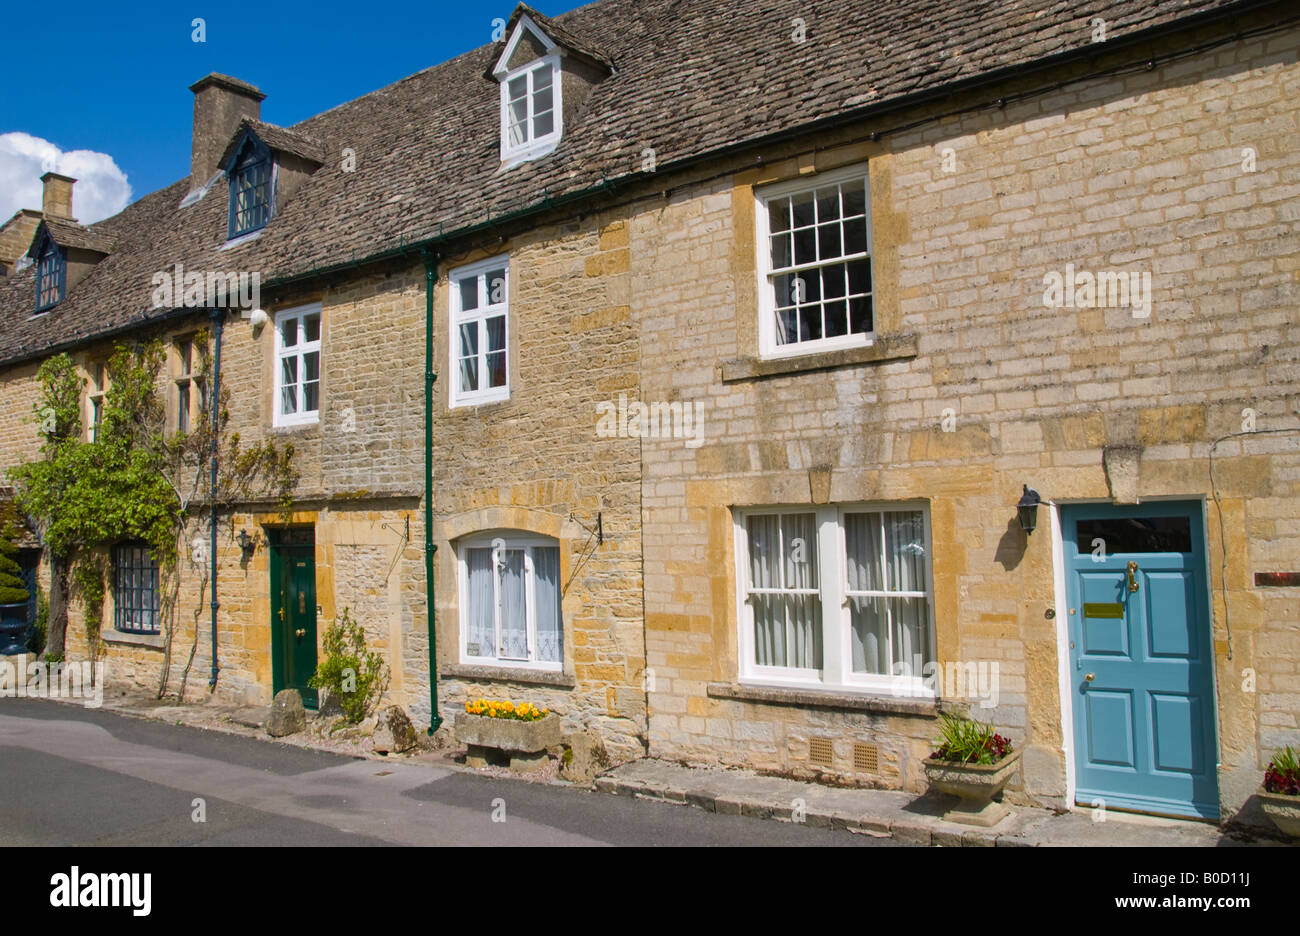 Terrace of houses in Stow on the Wold Cotswolds Gloucestershire England UK EU Stock Photo